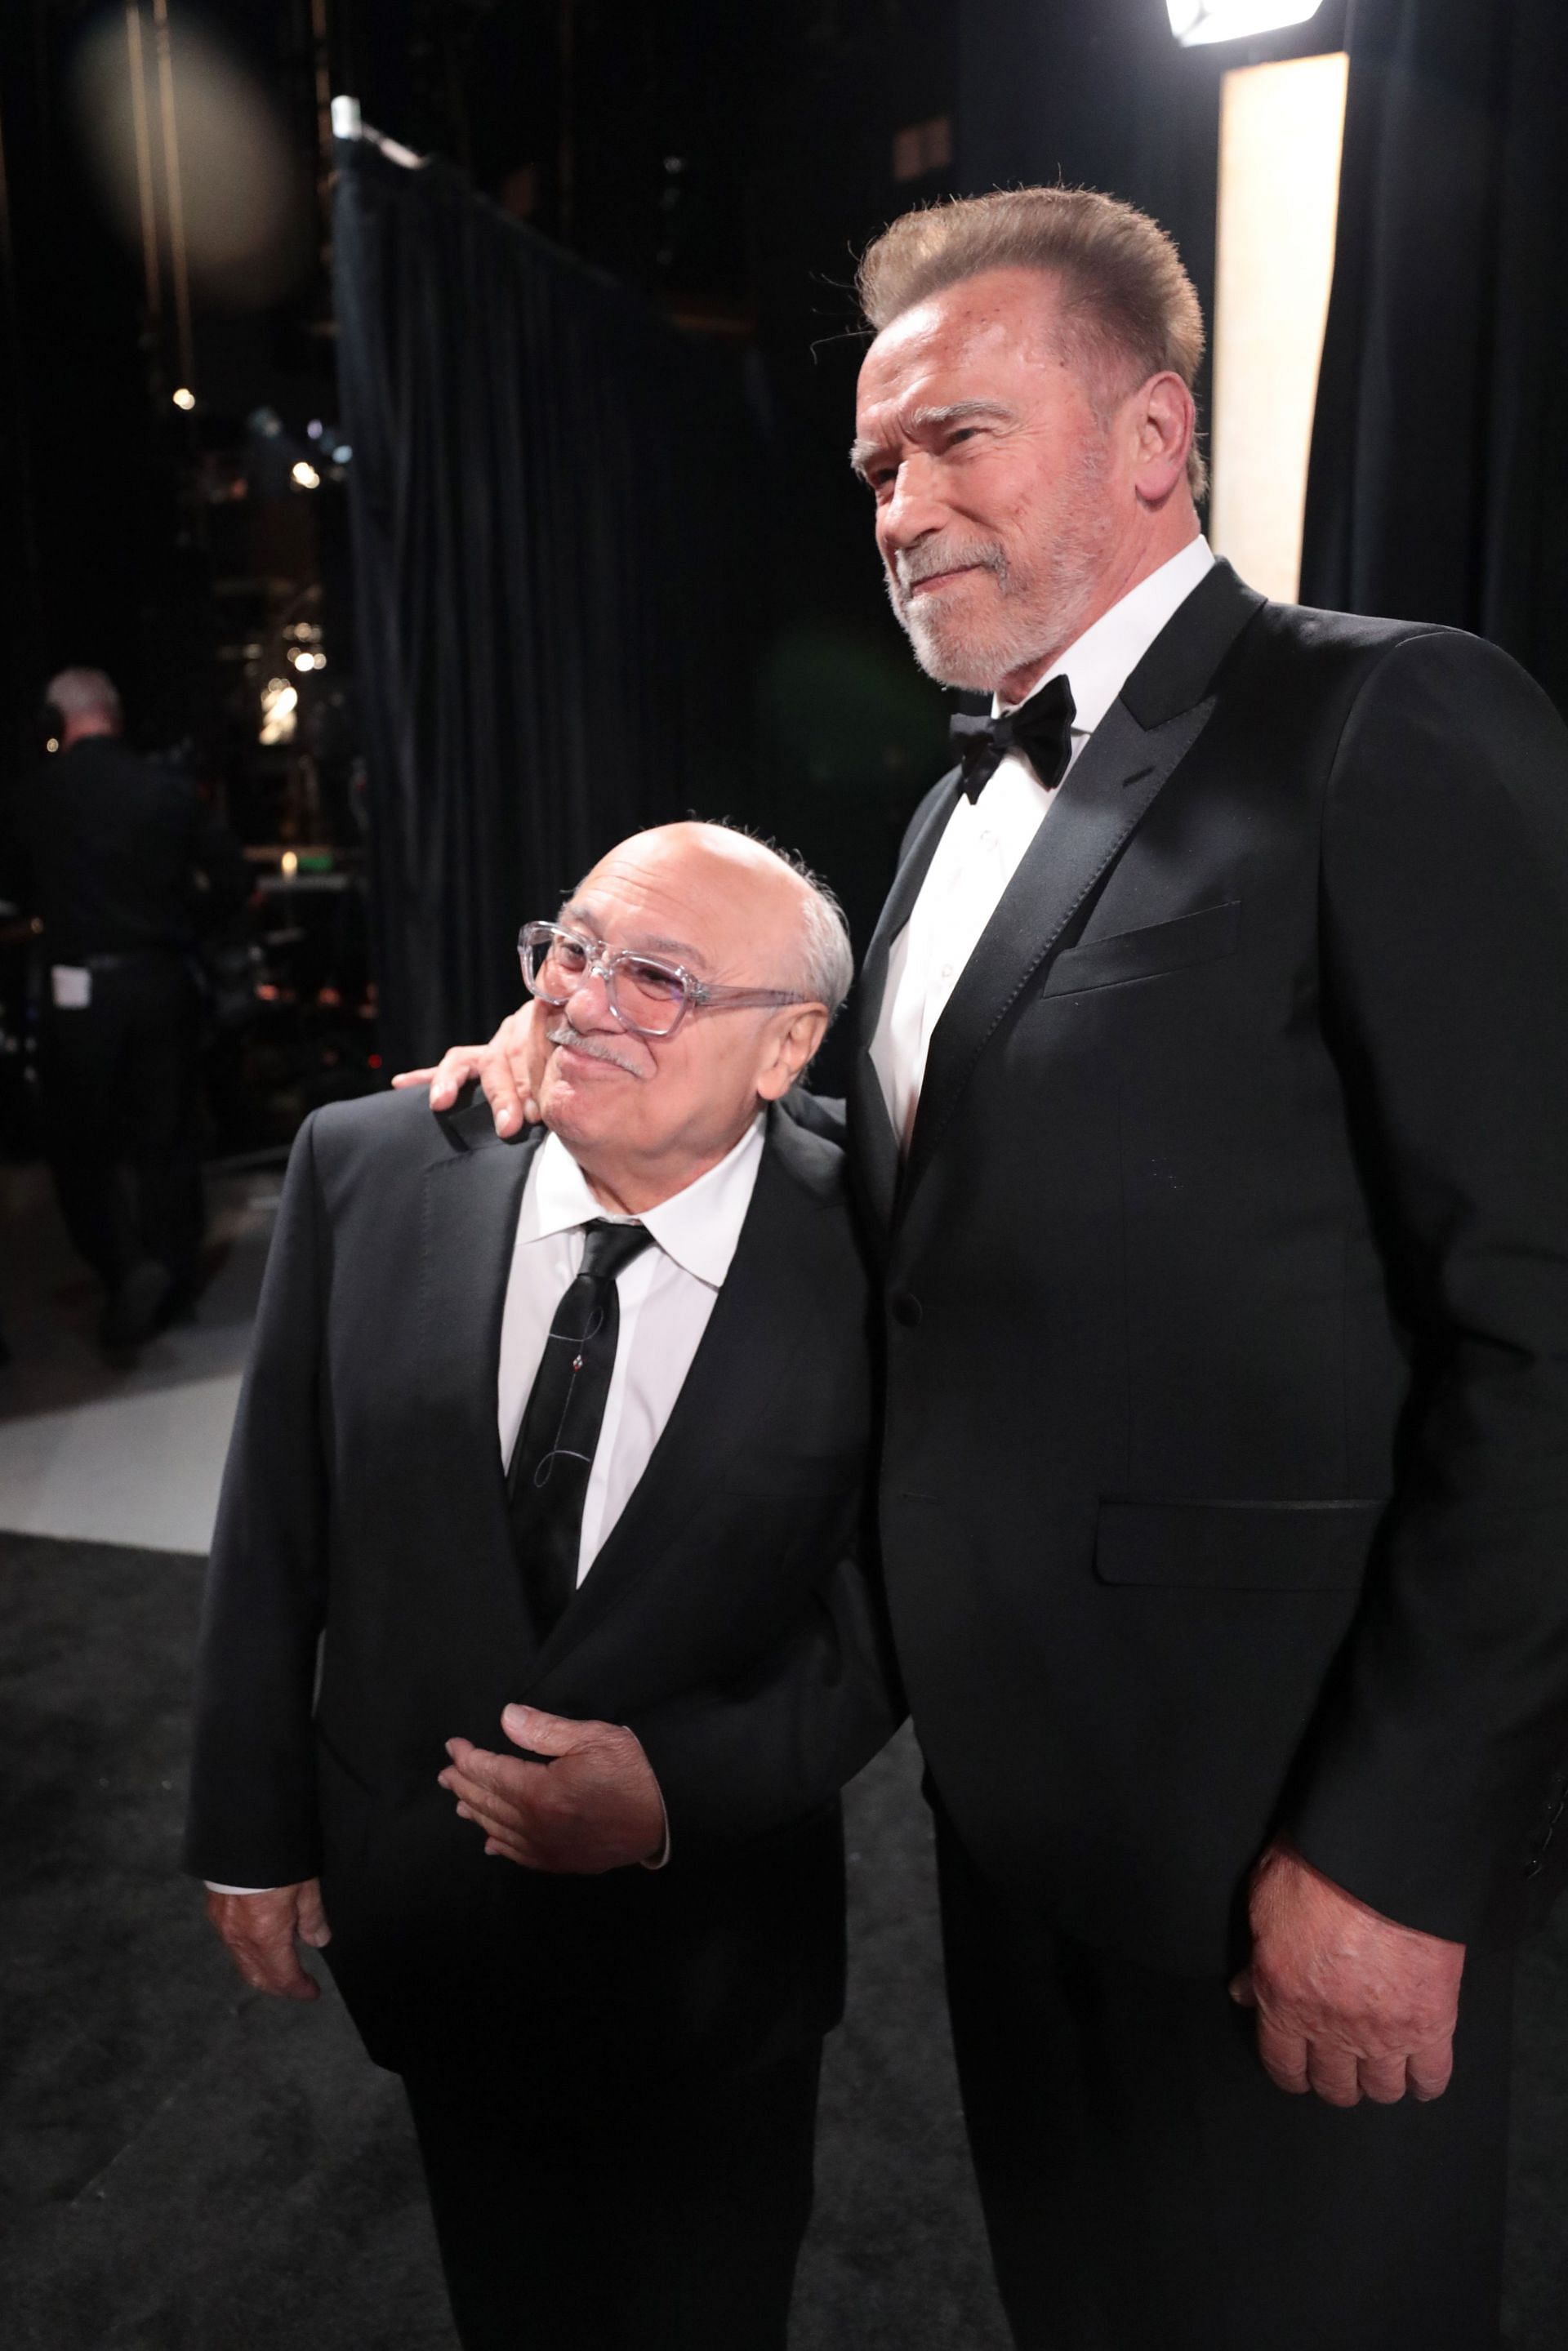 DeVito and Schwarzenegger at the 96th Annual Academy Awards Backstage (Photo via Getty Images)